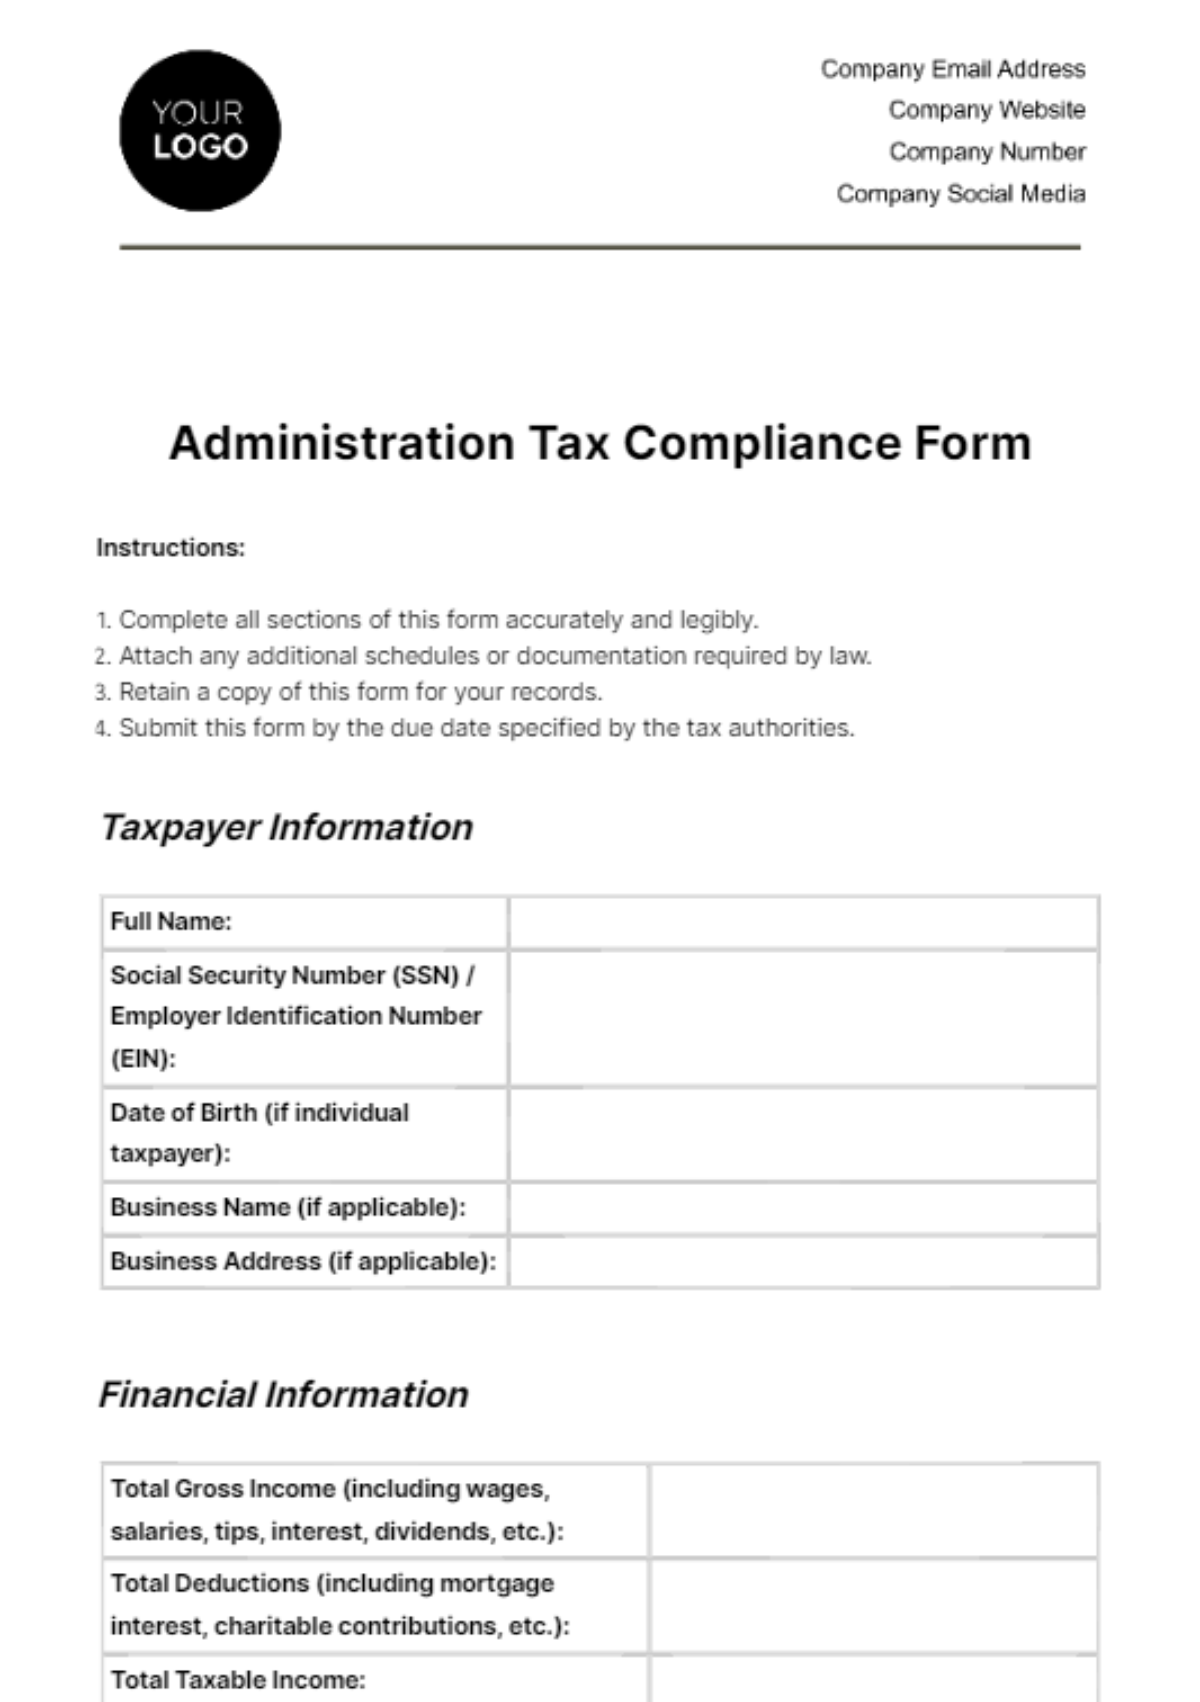 Administration Tax Compliance Form Template